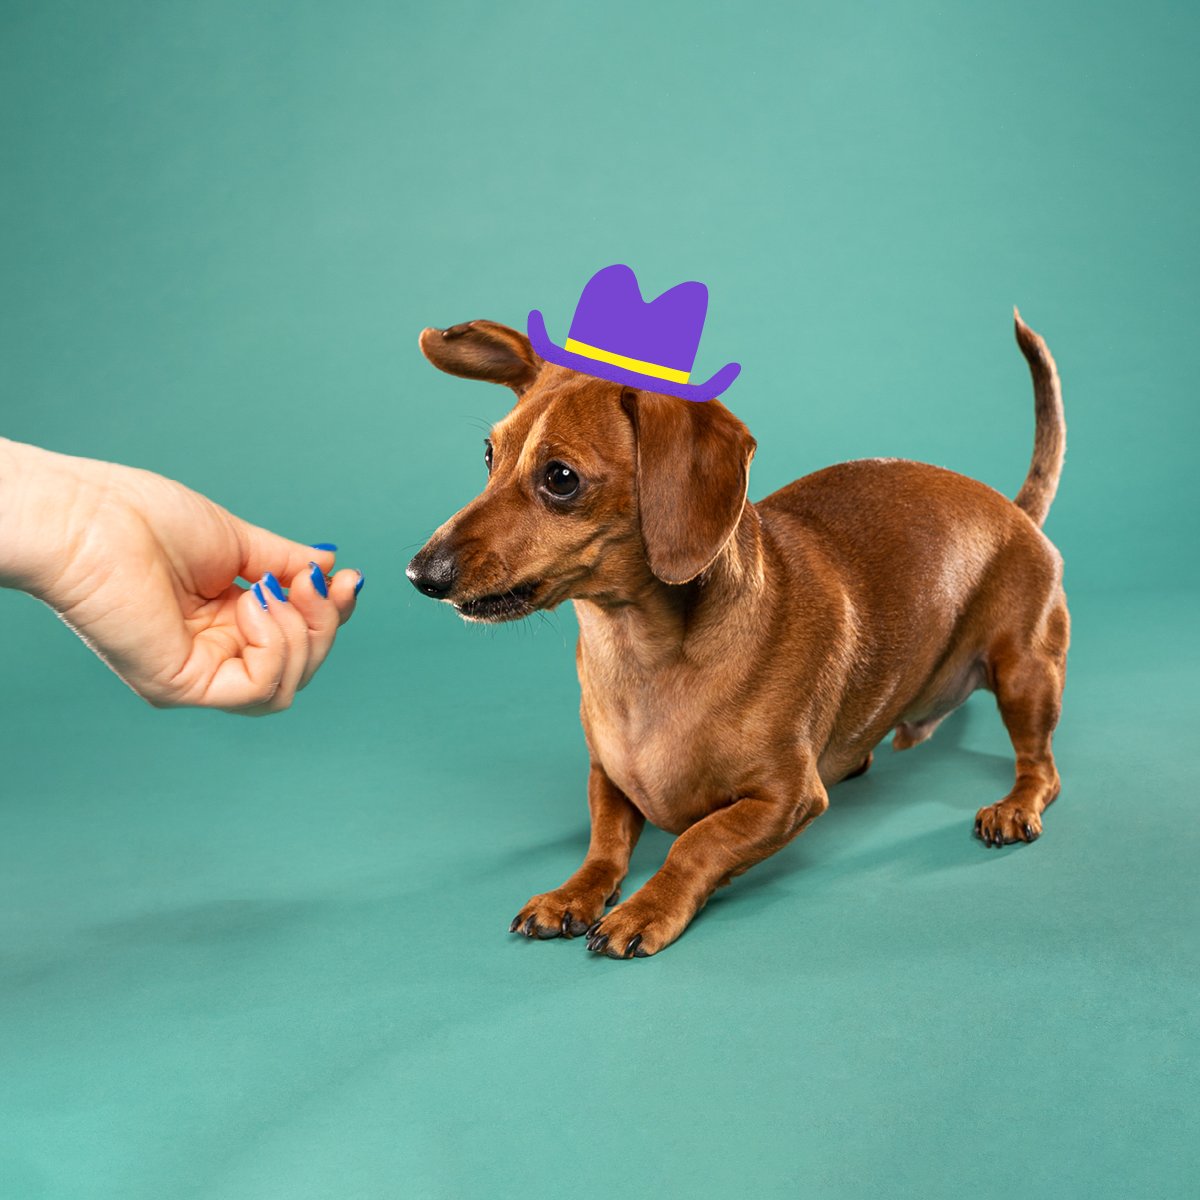 are wiener dogs easy to train